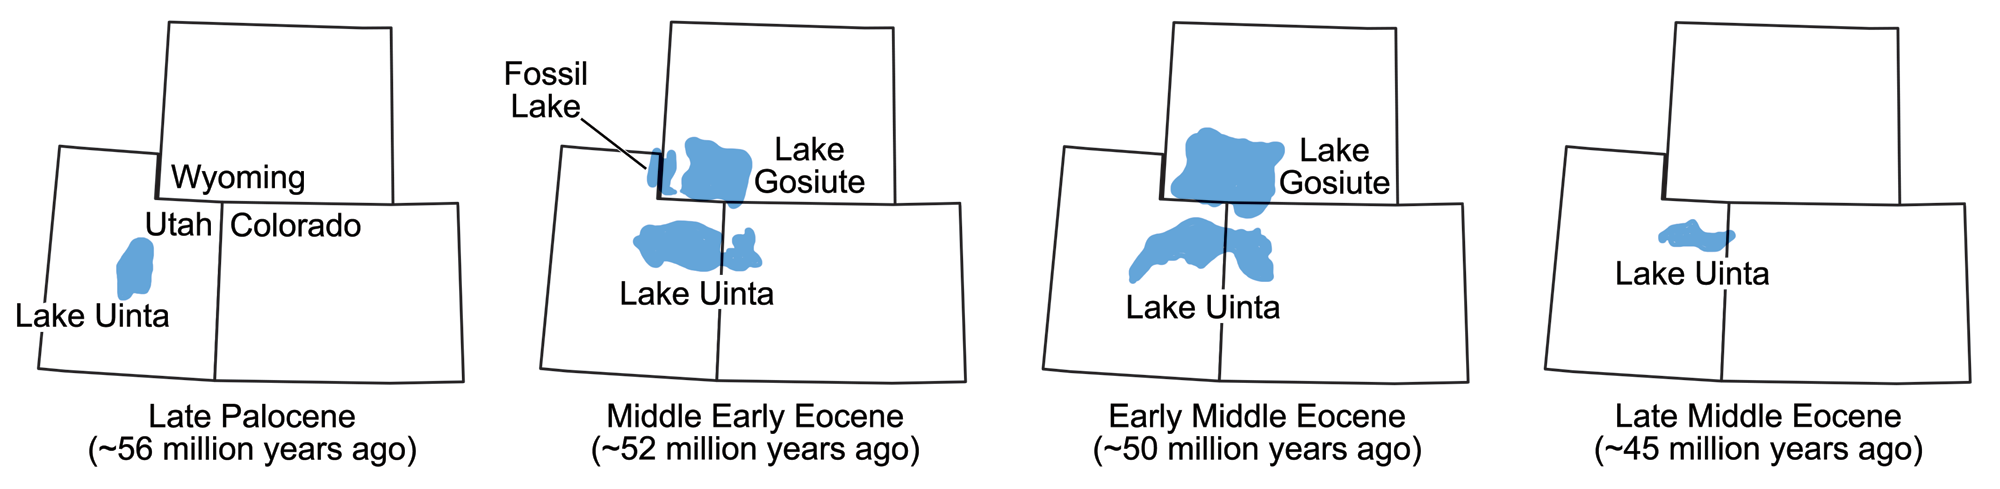 Maps of Wyoming, Colorado, and Utah at four different times in the Paleocene and Eocene showing the evolution of the Green River Formation lakes. At 56 million years ago, a small Lake Uinta occurs in central Utah. At about 52 million years ago, Lake Uinta occurs in northeastern Utah and northwestern Colorado, Fossil Lake occurs on the Utah-Wyoming border, and Lake Gosiute occurs in southwestern Wyoming. At about 50 million years ago, Lake Uinta is still present in Utah and Colorado, Lake Gosiute has enlarge, and Fossil Lake is gone. At about 45 million years ago, only a small remnant of Lake Uinta occurs, mostly in northeastern Utah.